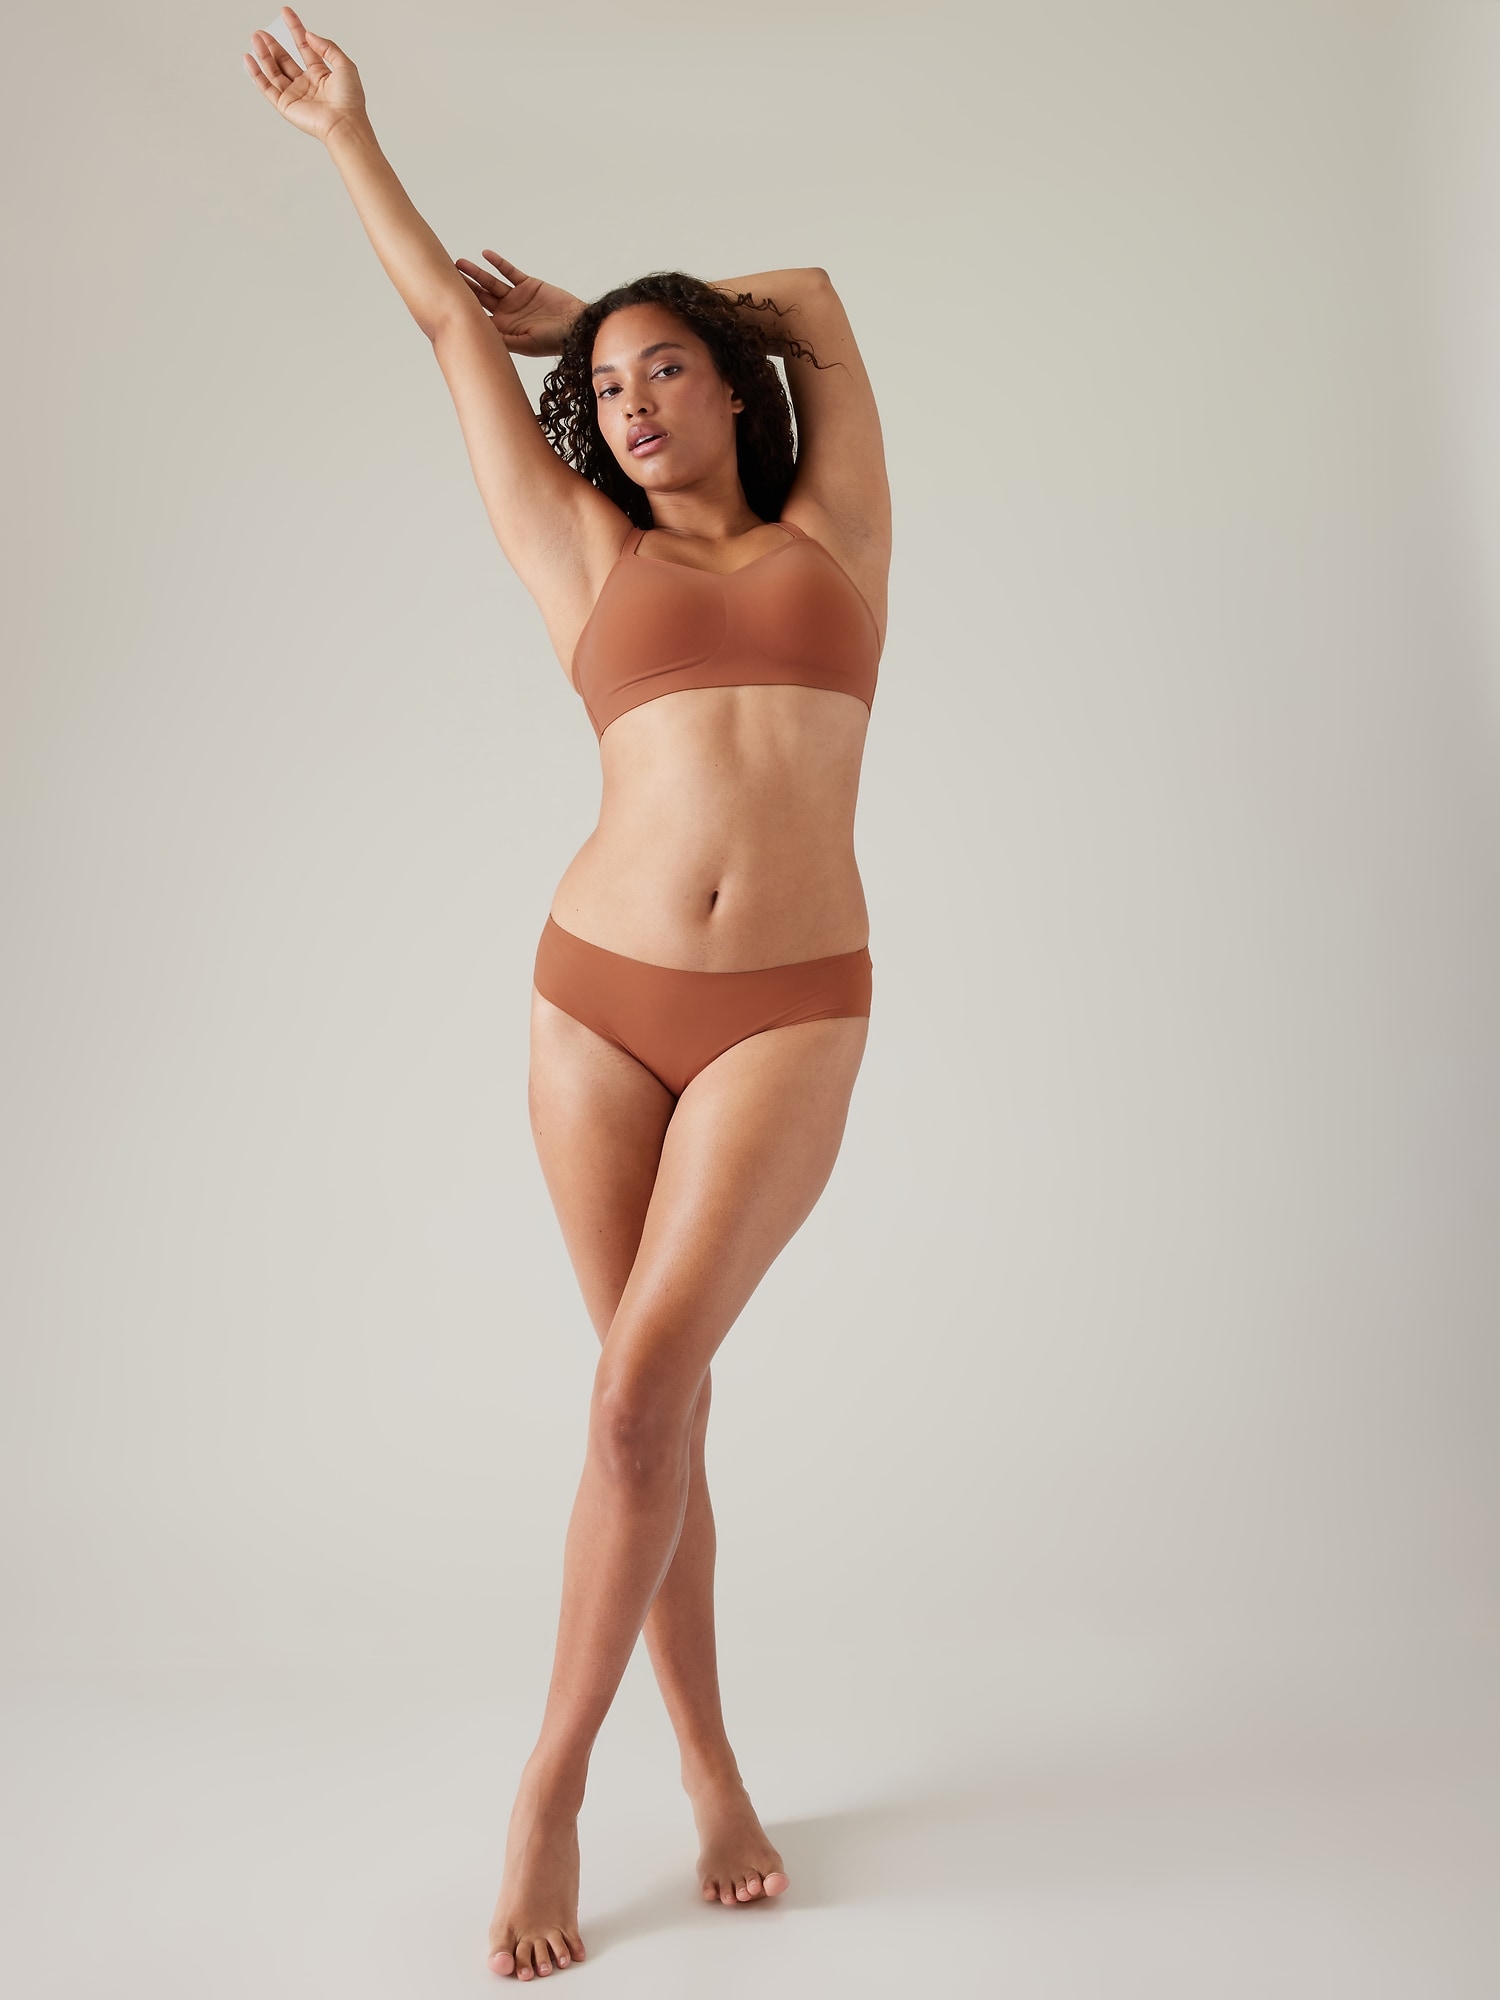 Jodee prosthetic bras with Athleta Empower pads for a Flat fashion